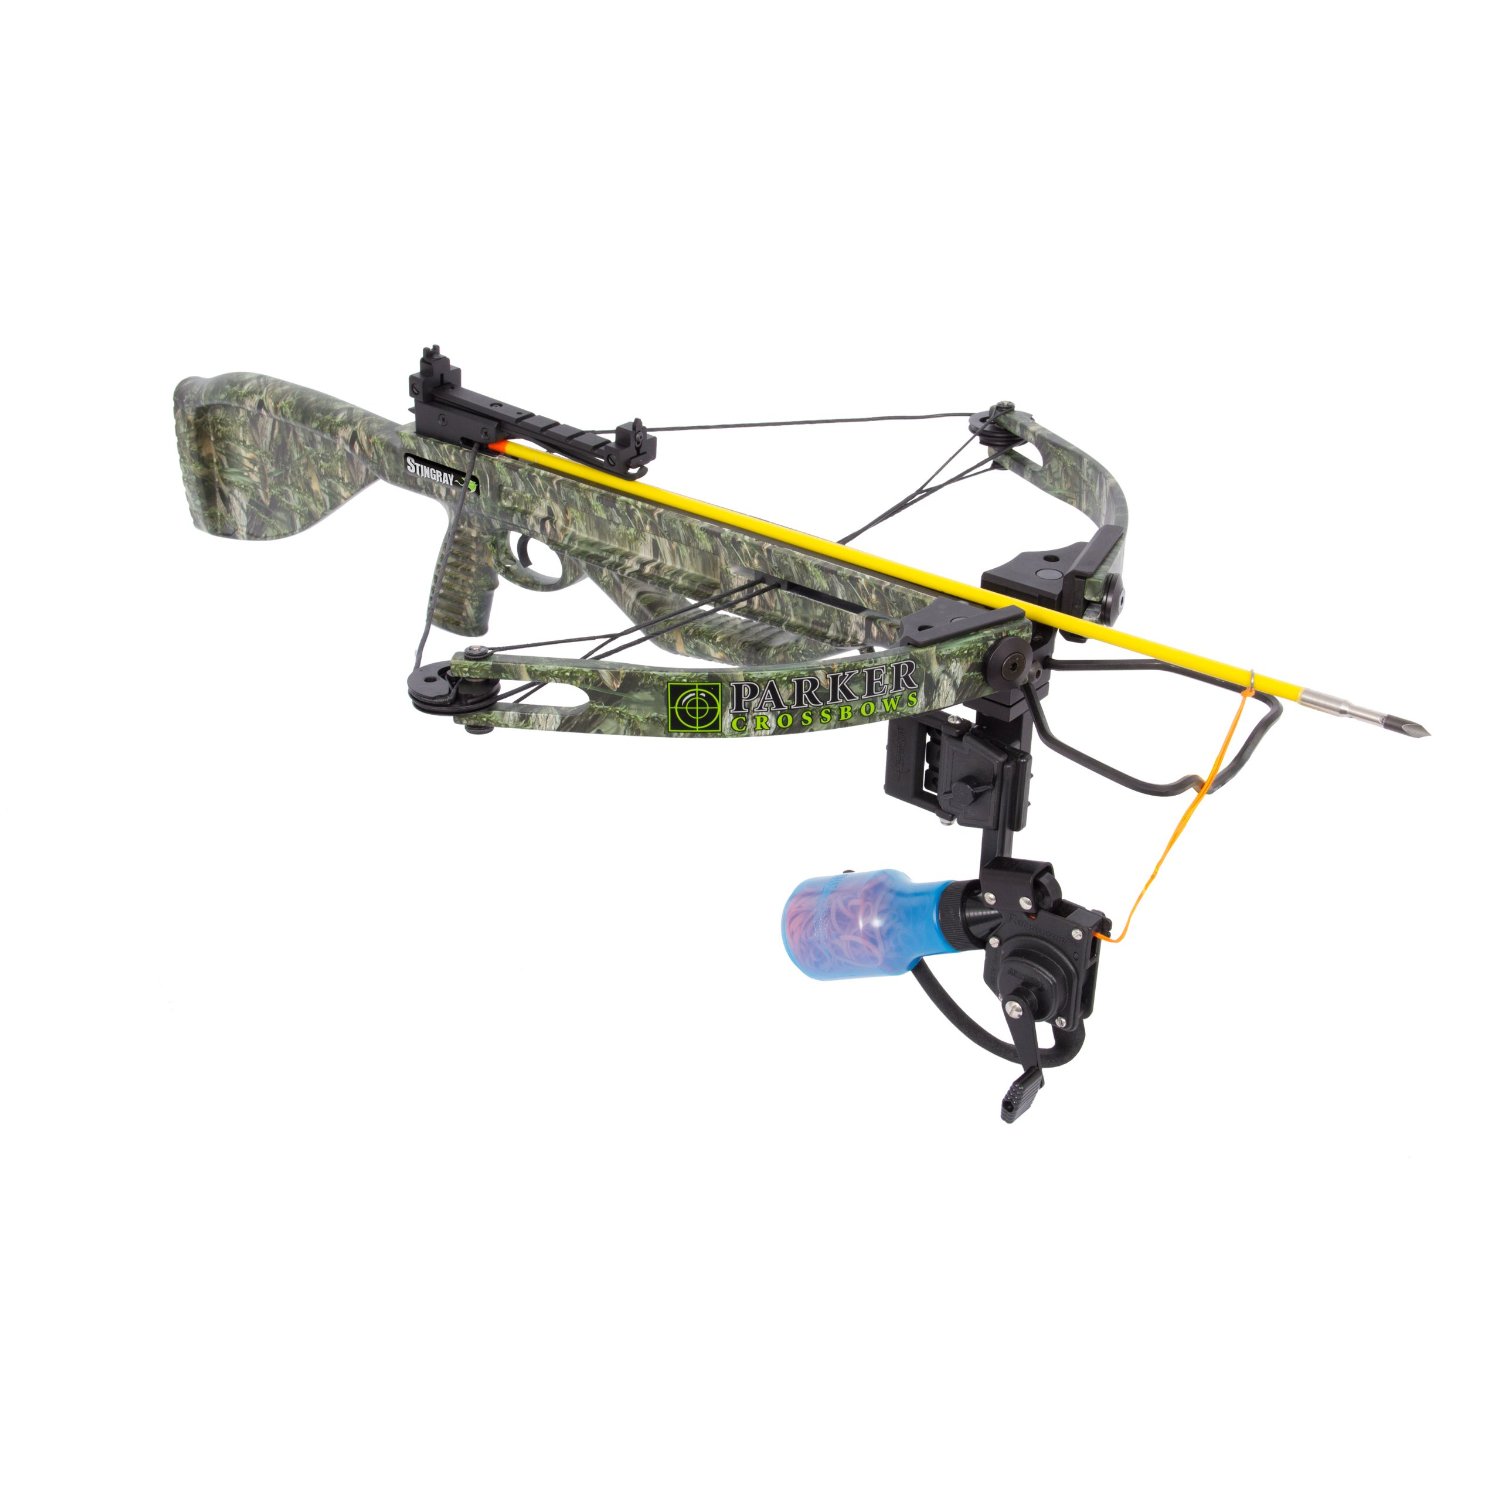 Parker StingRay Review - Compound Crossbow